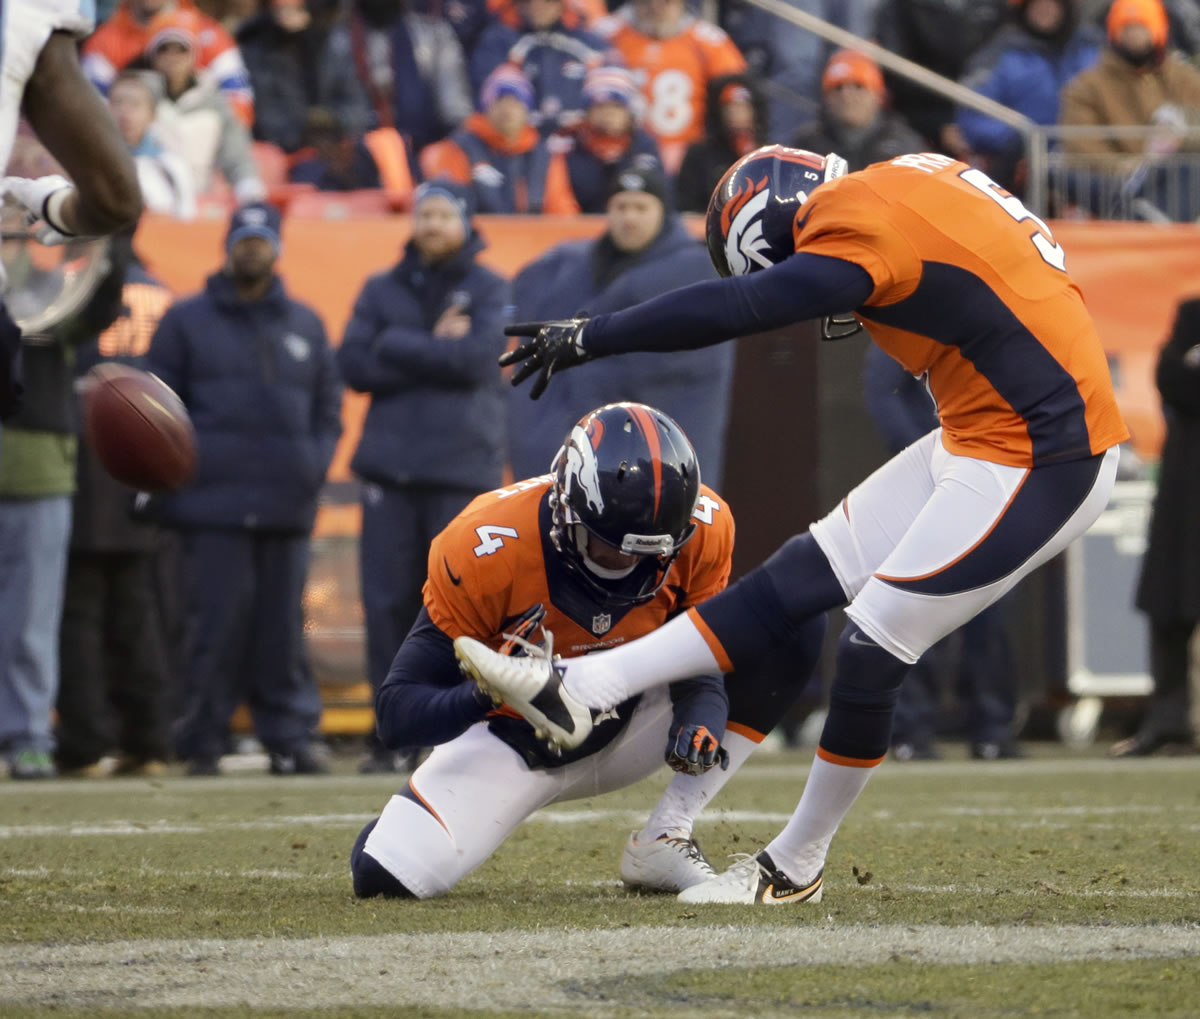 Denver Broncos kicker Matt Prater, right, kicks a 64-yard field goal as Britton Colquitt holds during the first half of an NFL football game against the Tennessee Titans on Sunday, Dec. 8, 2013, in Denver.